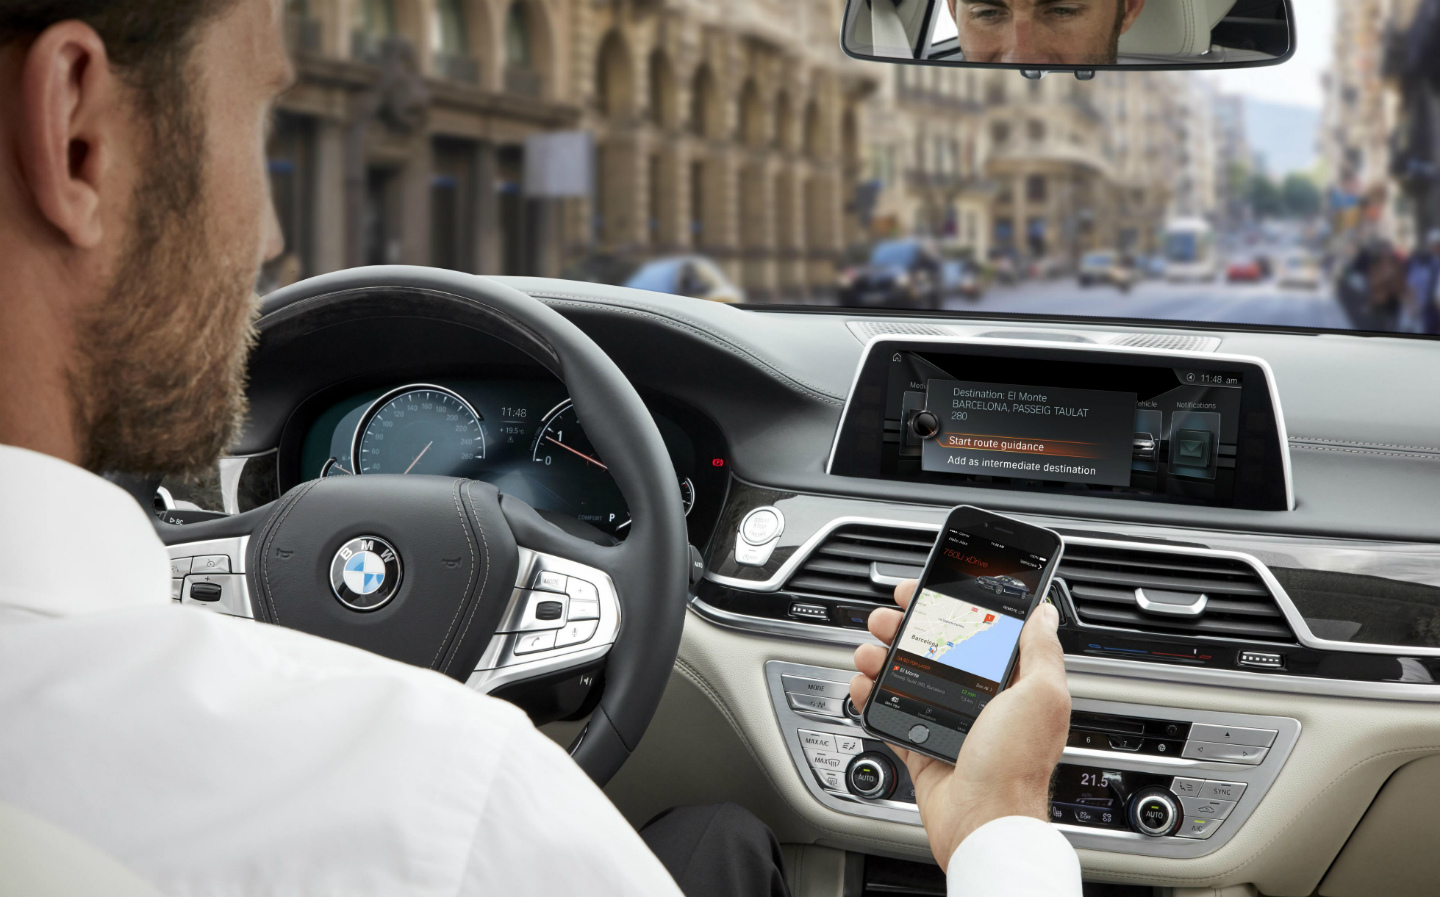 Big Brother is driving you: how new cars collect data to sell